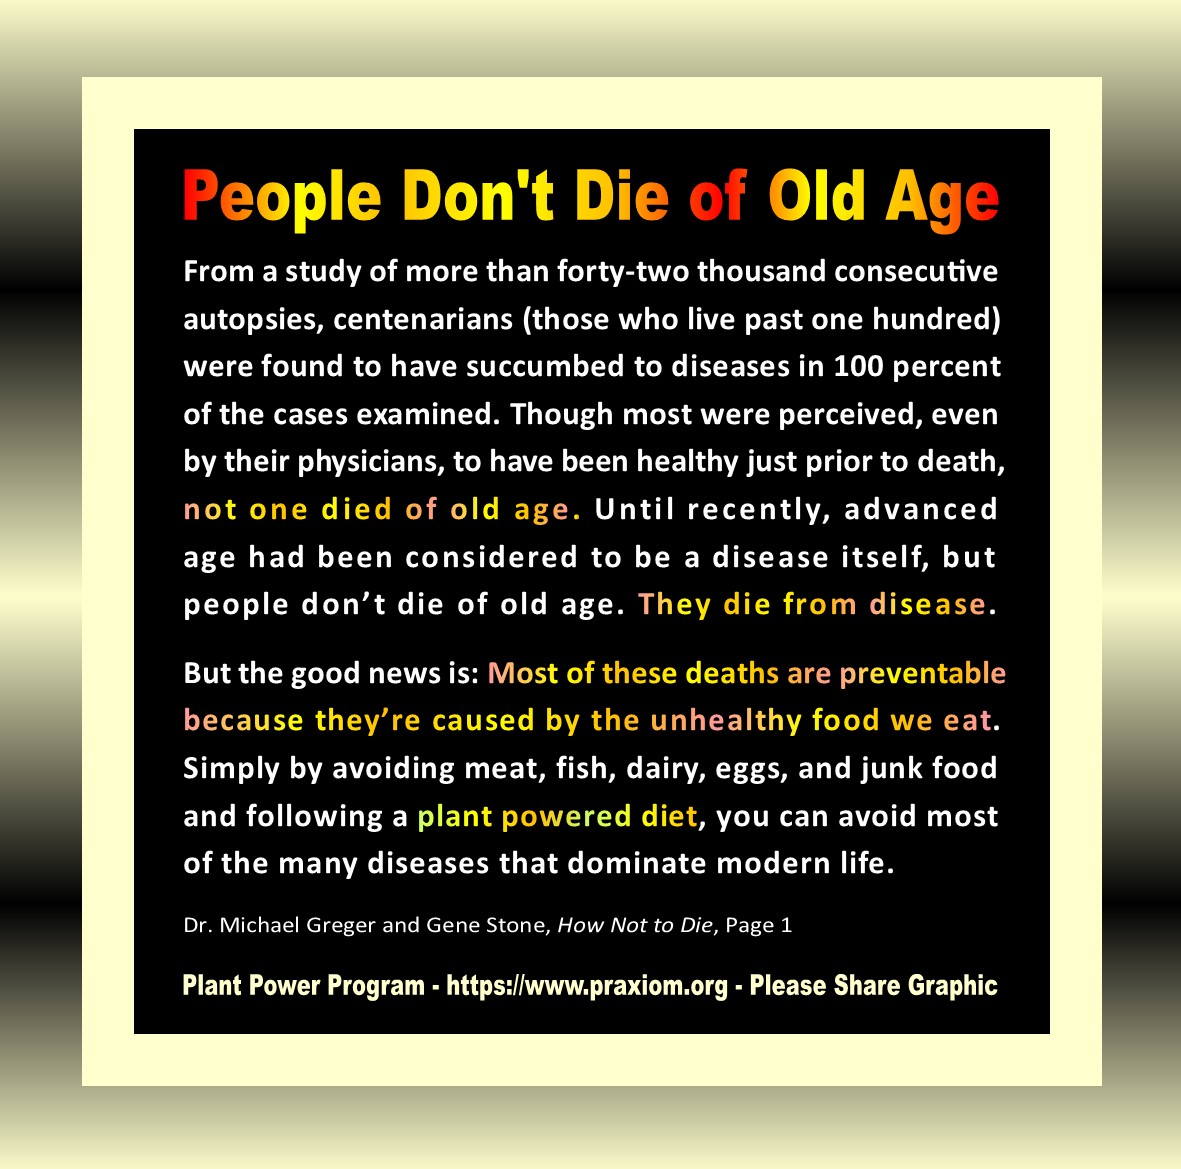 People Don't Die of Old Age - Dr. Michael Greger